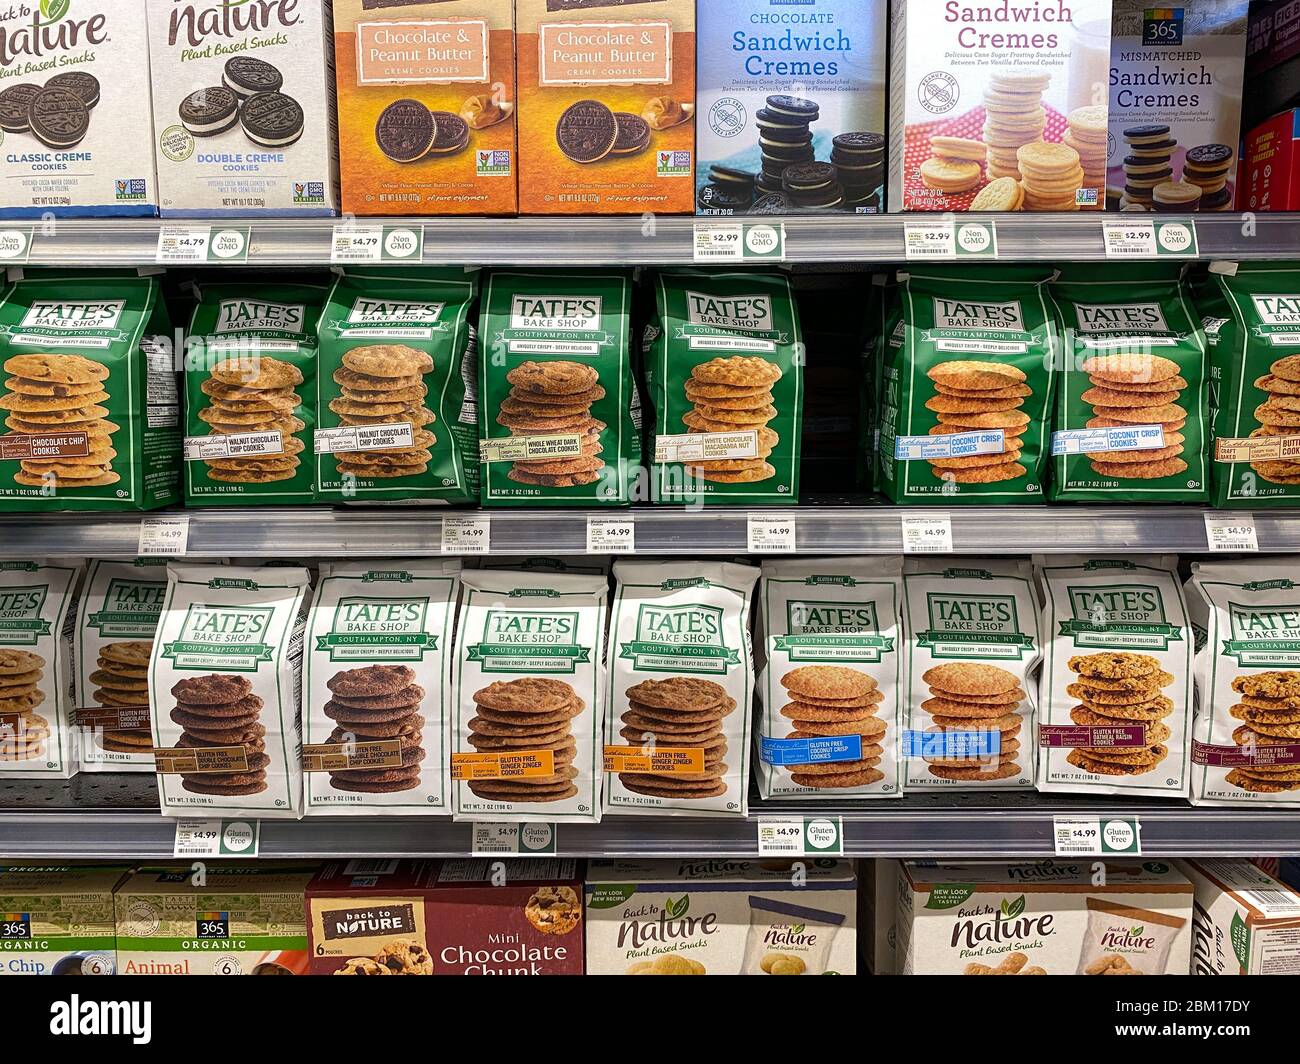 Orlando,FL/USA-5/3/20: A display of Tate's Bake Shop Cookies at a Whole Foods Market Grocery Store. Stock Photo